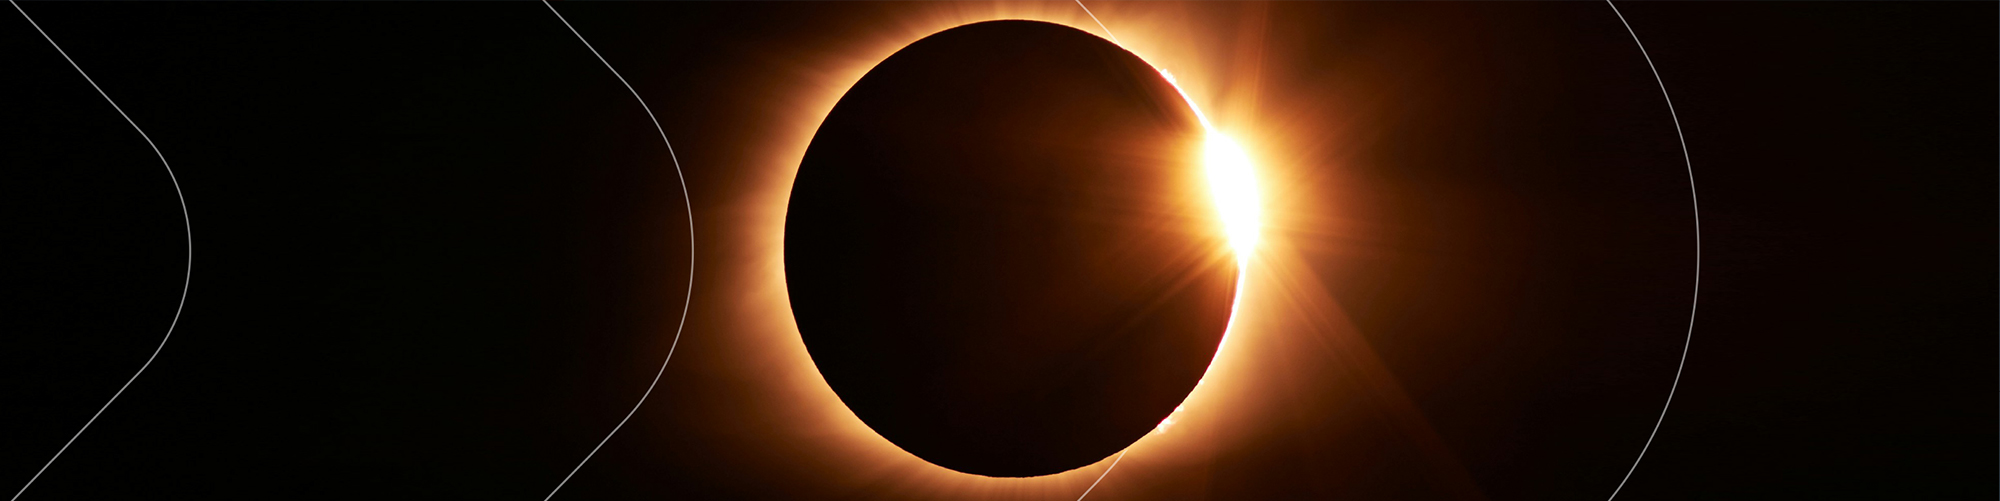 US Solar Eclipse Hotel Occupancy Increases by Another 10%